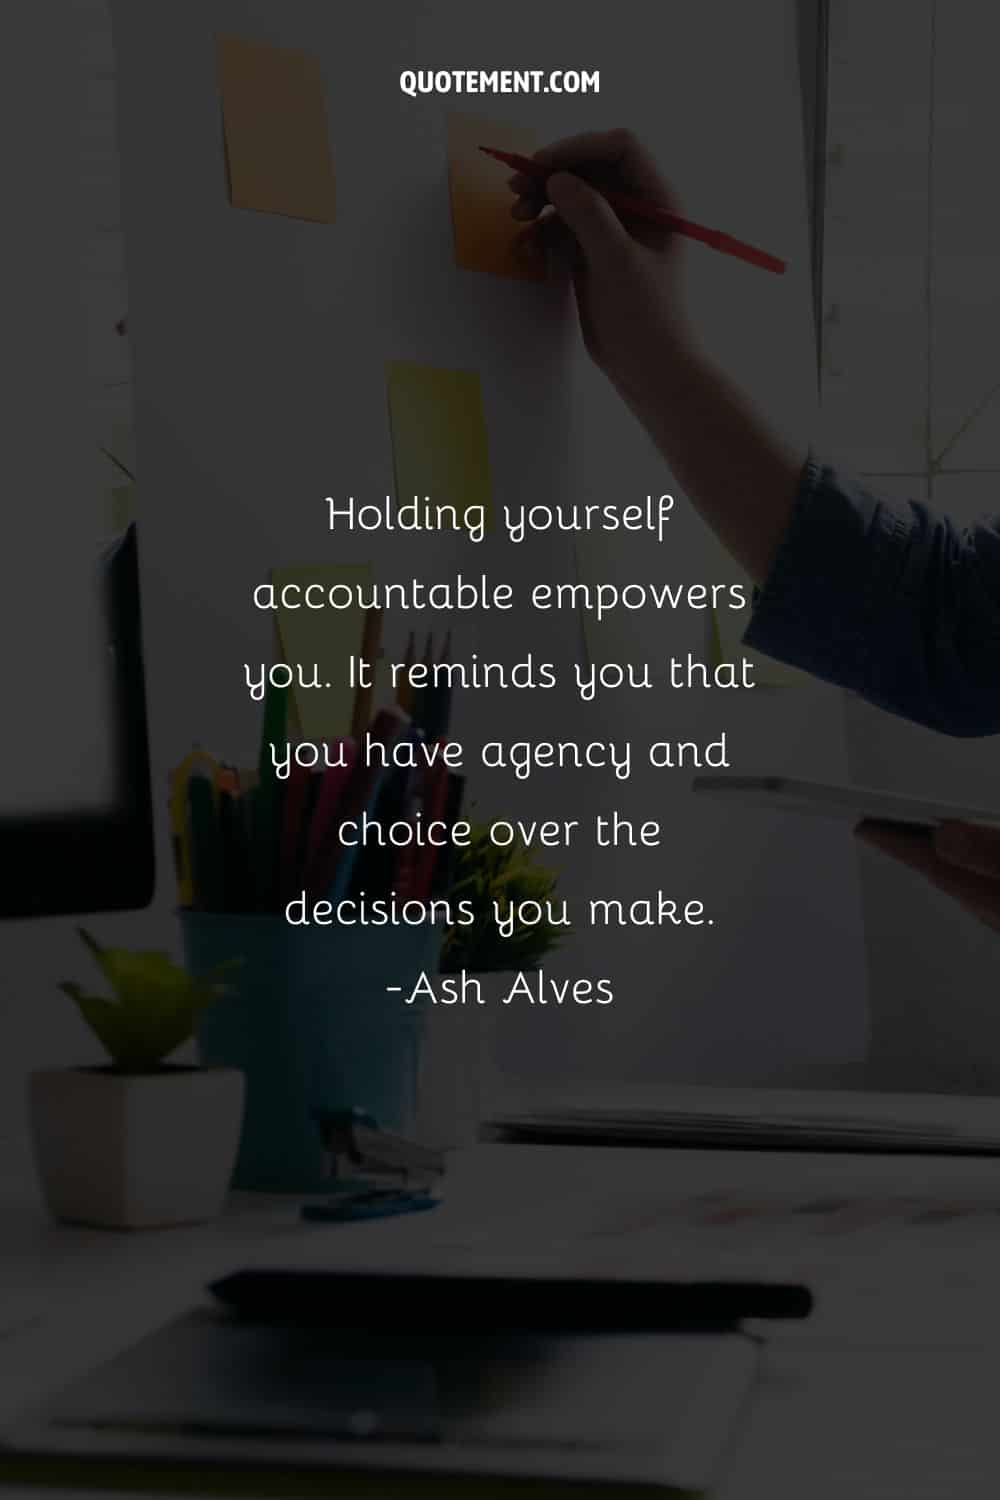 Holding yourself accountable empowers you